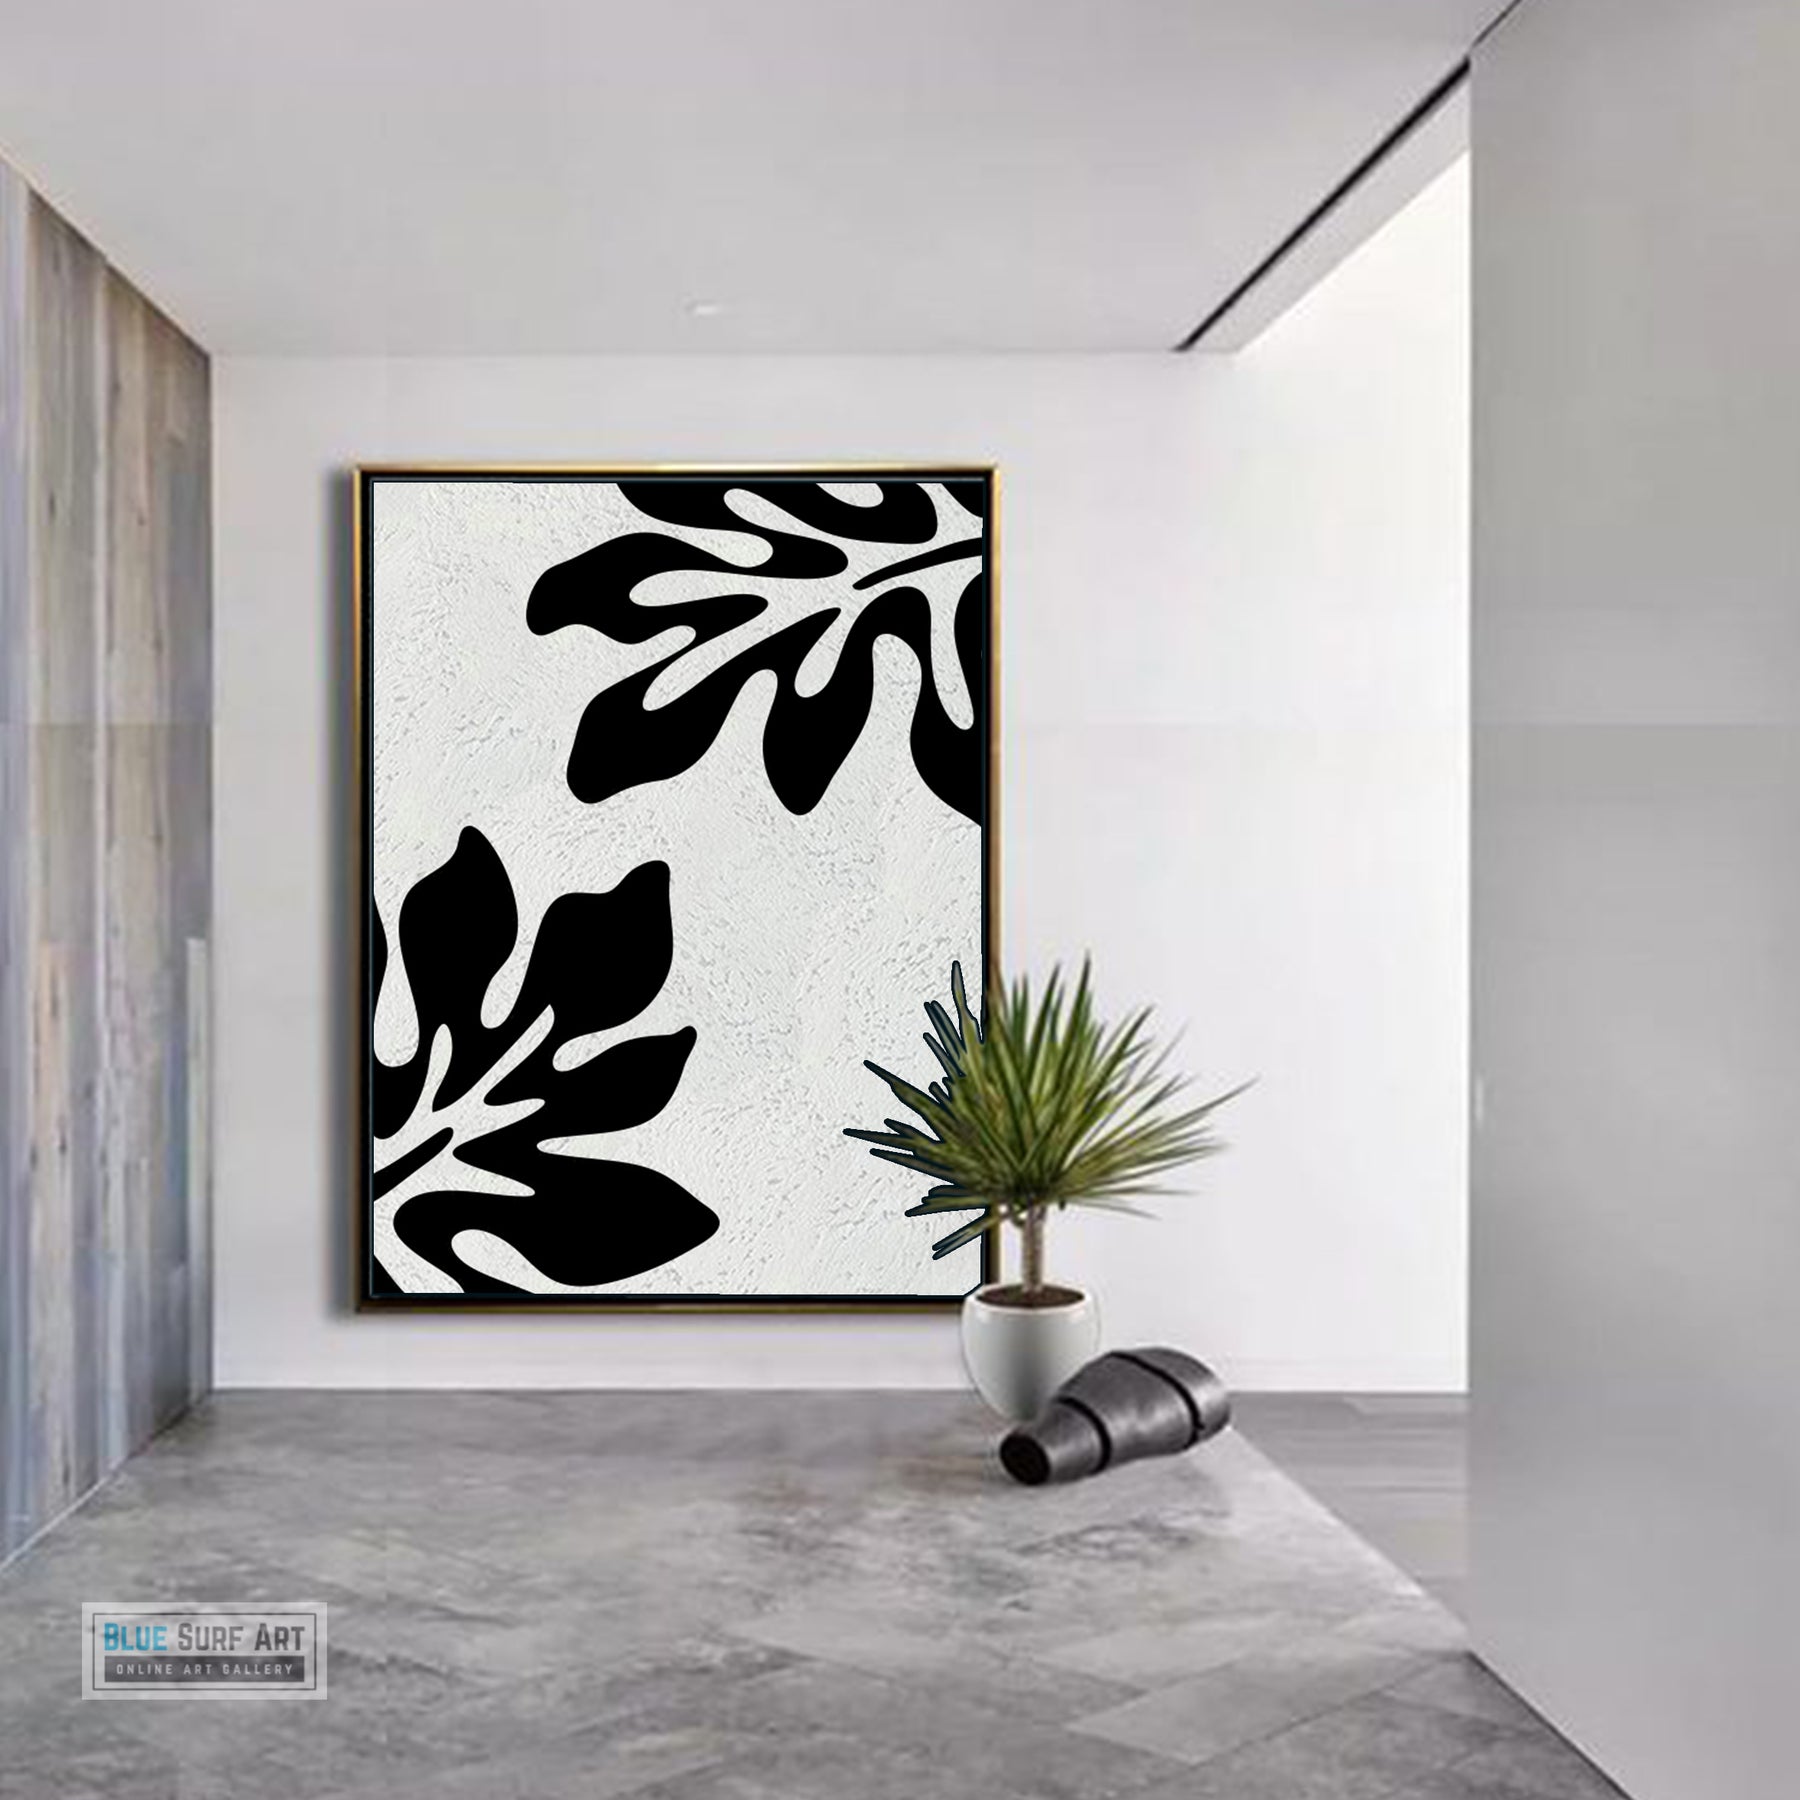 Slyart Black and White Canvas Wall Art, Framed Abstract Oil Painting on  Canvas Textured Contemporary Wall Art, Minimalism Black and White Painting